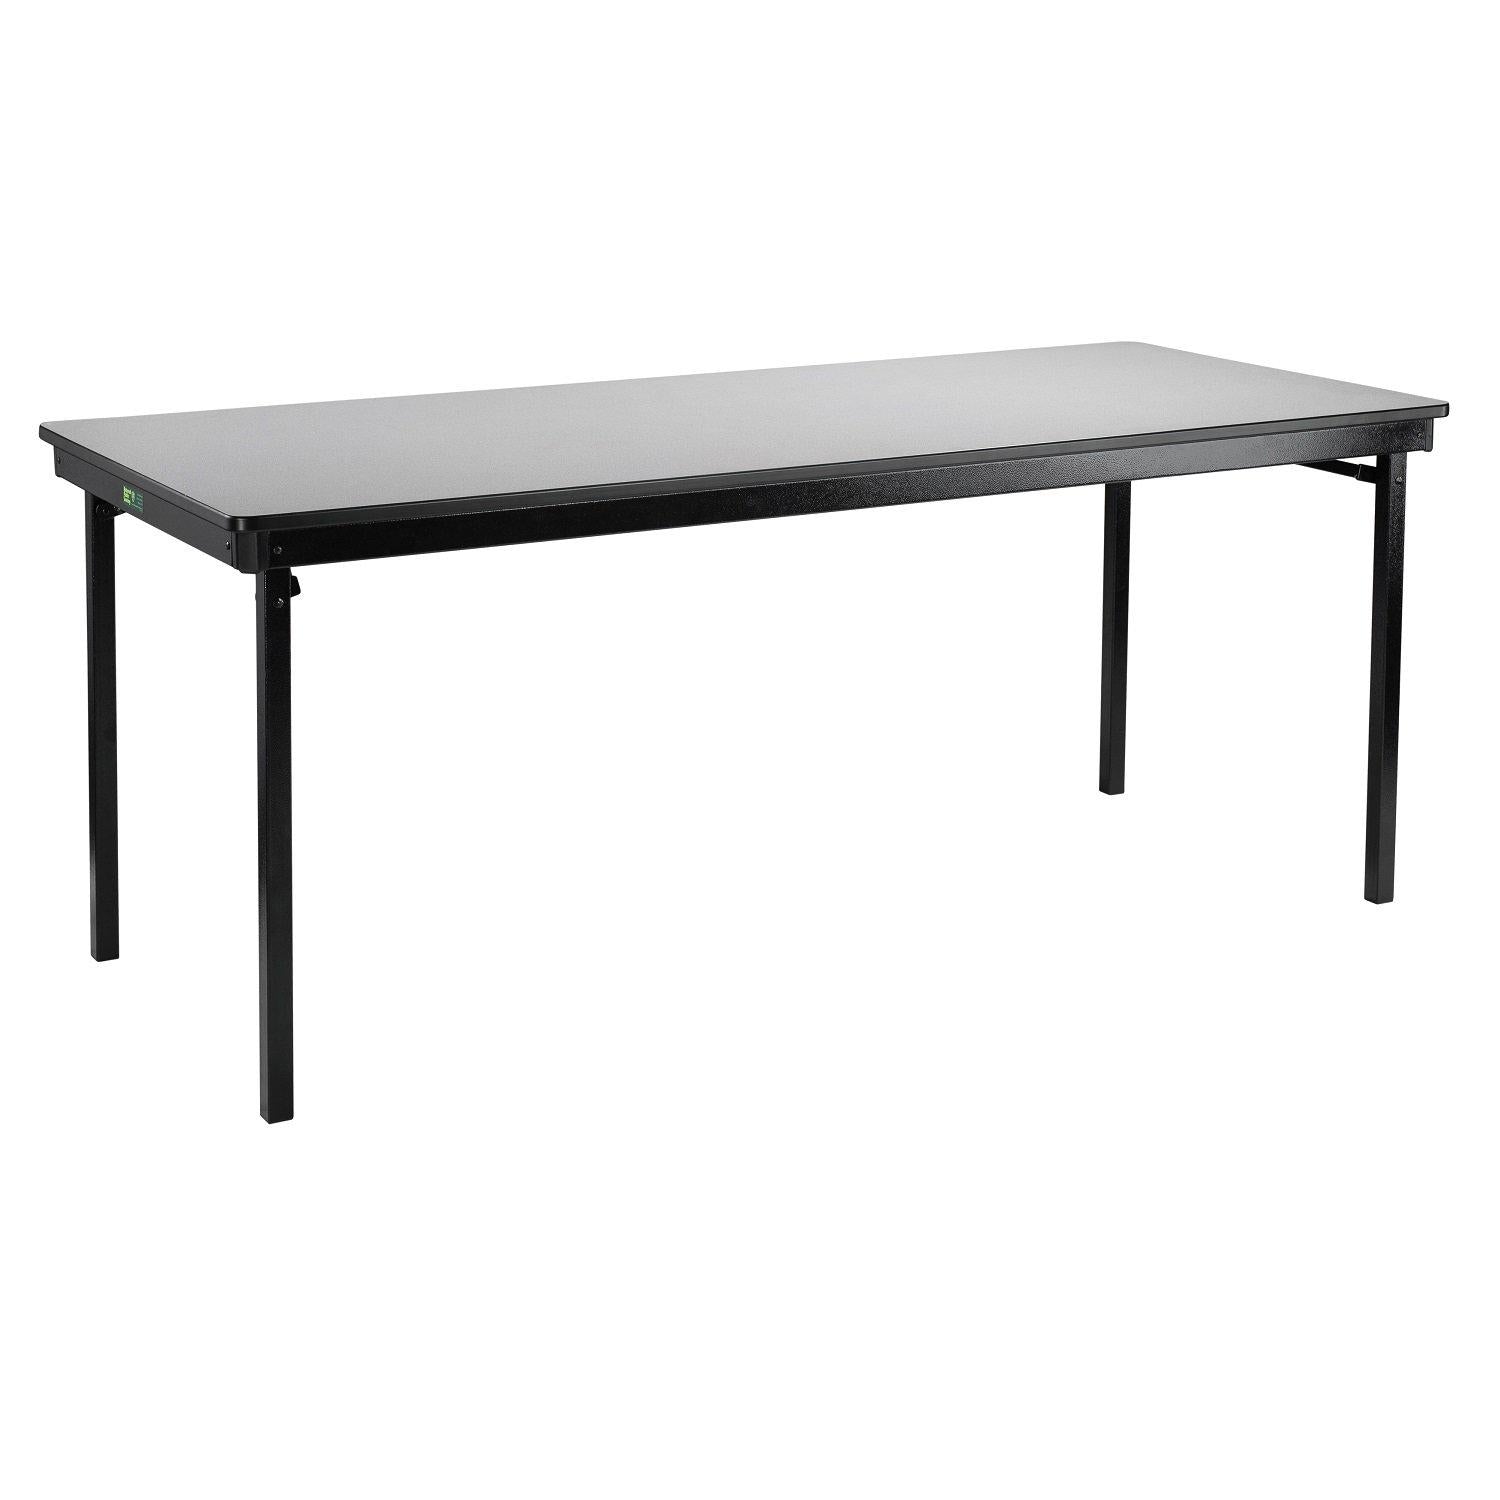 Max Seating Folding Table, 30" x 60", Particleboard Core, High Pressure Laminate Top with T-Mold Edging